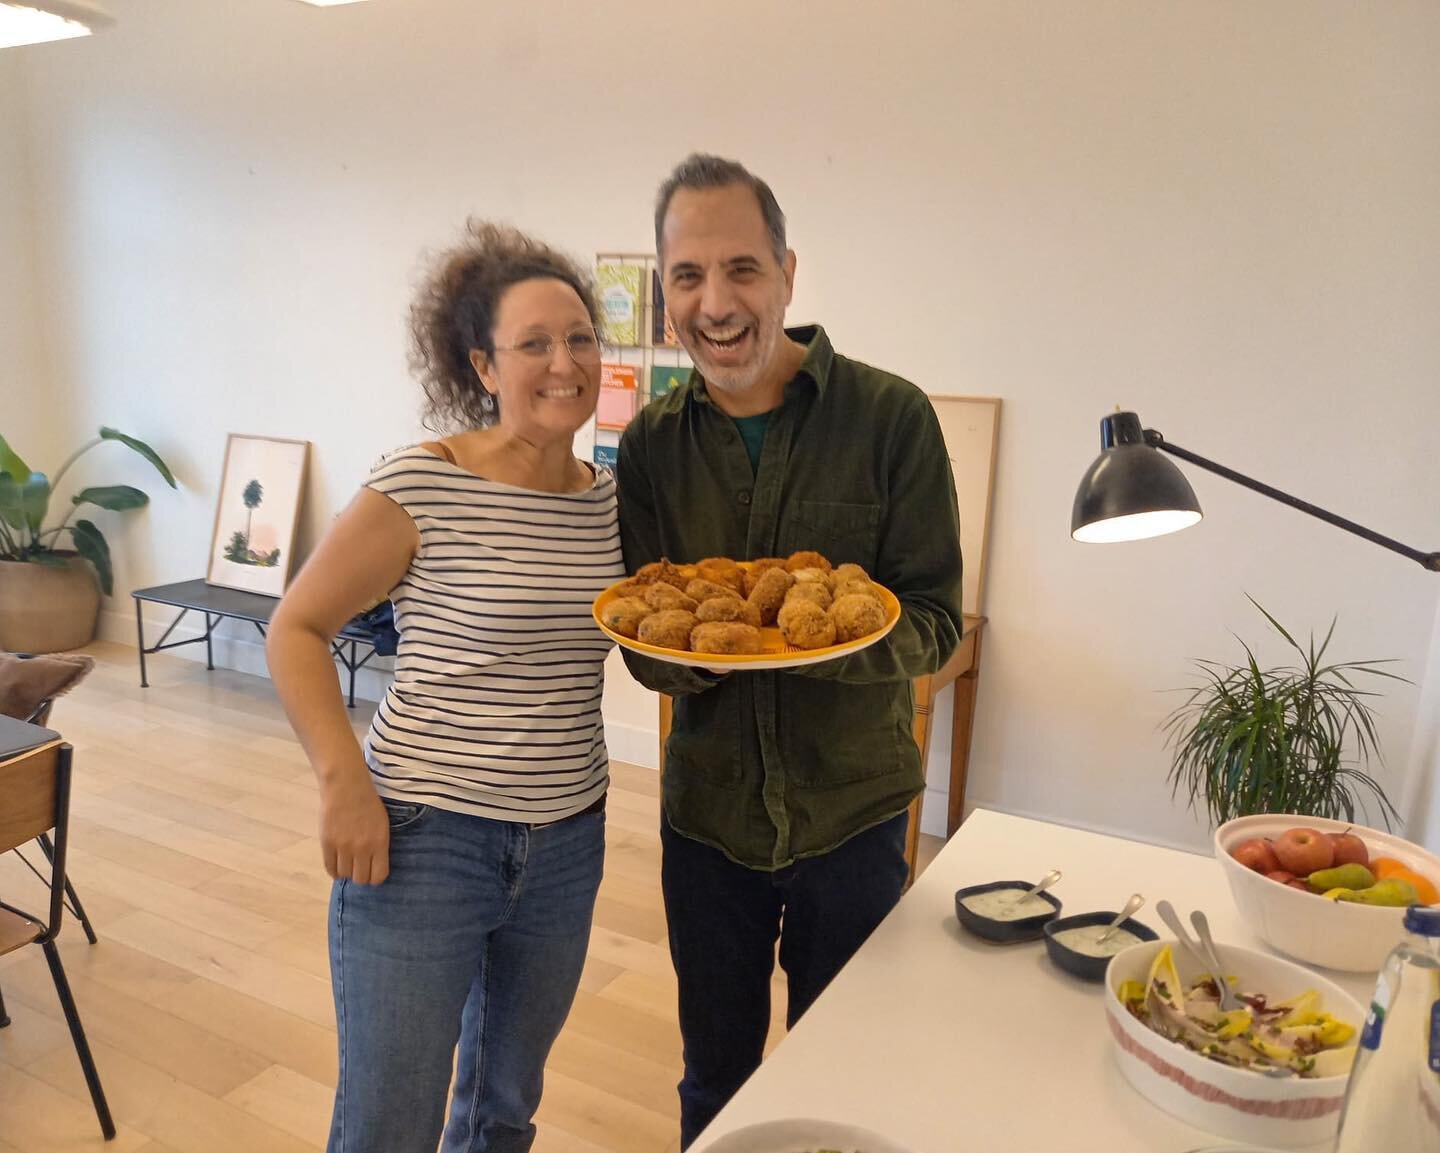 OMG! Guess who loved our food 🙈🥳. @ottolenghi came to visit @boekhandel_stad_leest to celebrate the launch of his latest book 🌻 

Head over to @boekhandel_stad_leest to get your copy! You won&rsquo;t be disappointed 😊

P.S. our chef de cuisine So